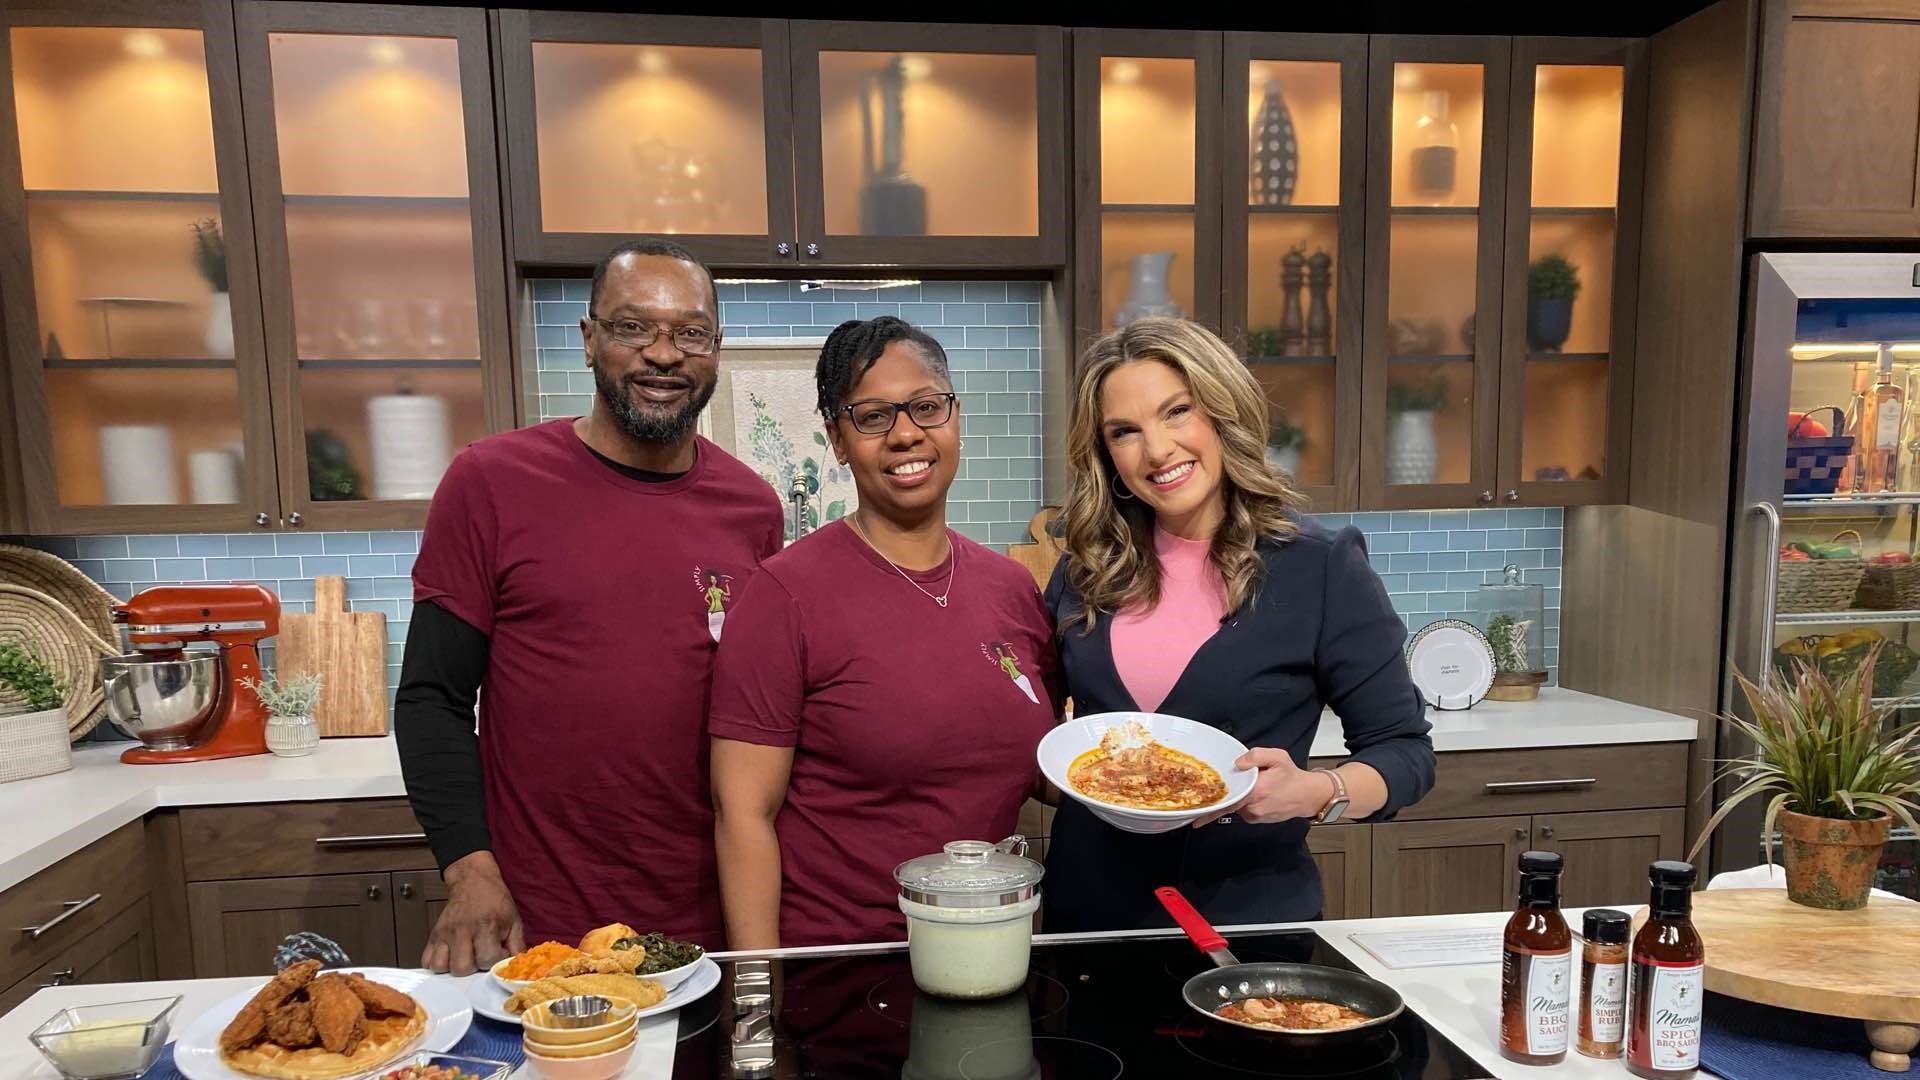 Simply Soulful Cafe is one of several Black-owned restaurants participating in Black Restaurant Week Seattle, an annual, multi-city culinary movement. #newdaynw